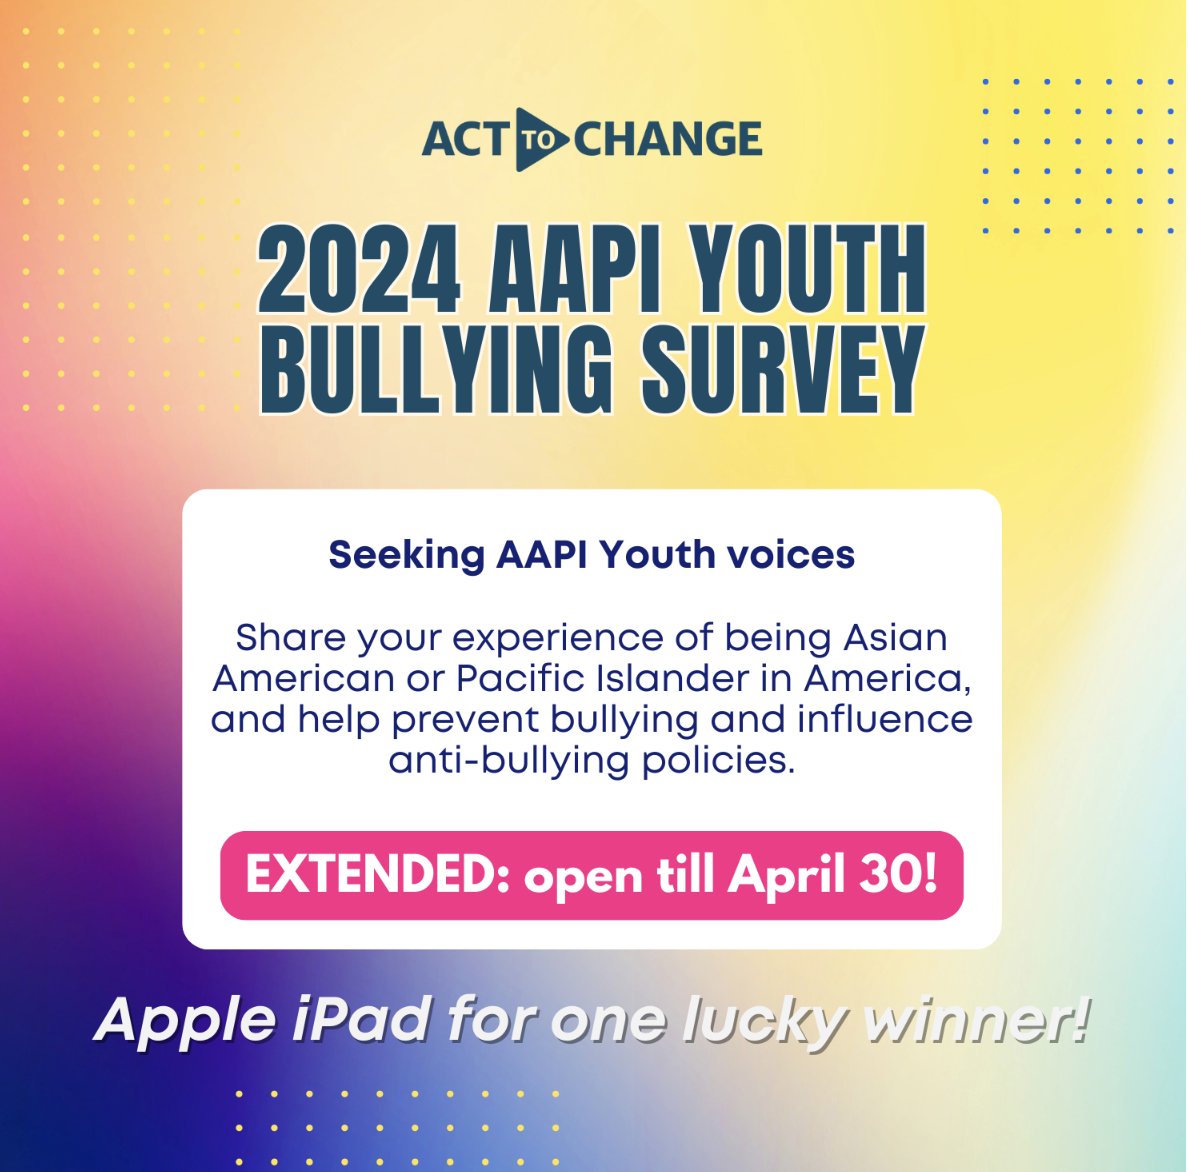 #Research: From our partners @ActToChange:
Take 2024 AAPI Youth Bullying Survey, created by Act to Change in partnership w University of Maryland's Bullying Prevention & Mental Health Promotion Lab
Let's use power of data to #endbullying
bit.ly/2024ATCSurvey
Deadline April 30